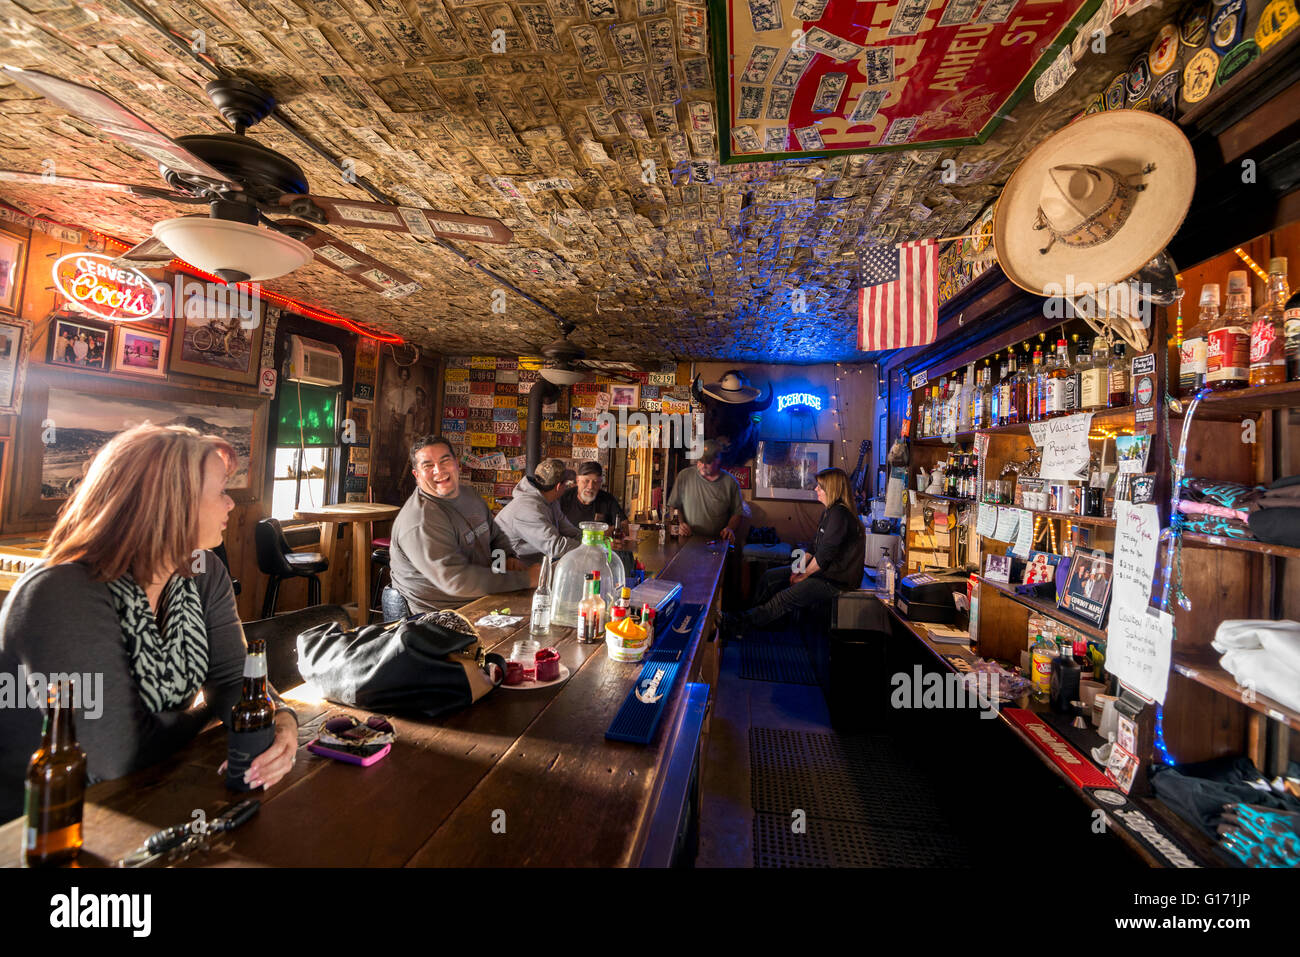 Patrons in the No Scum Allowed saloon in the historic town of White Oaks, New Mexico. Stock Photo